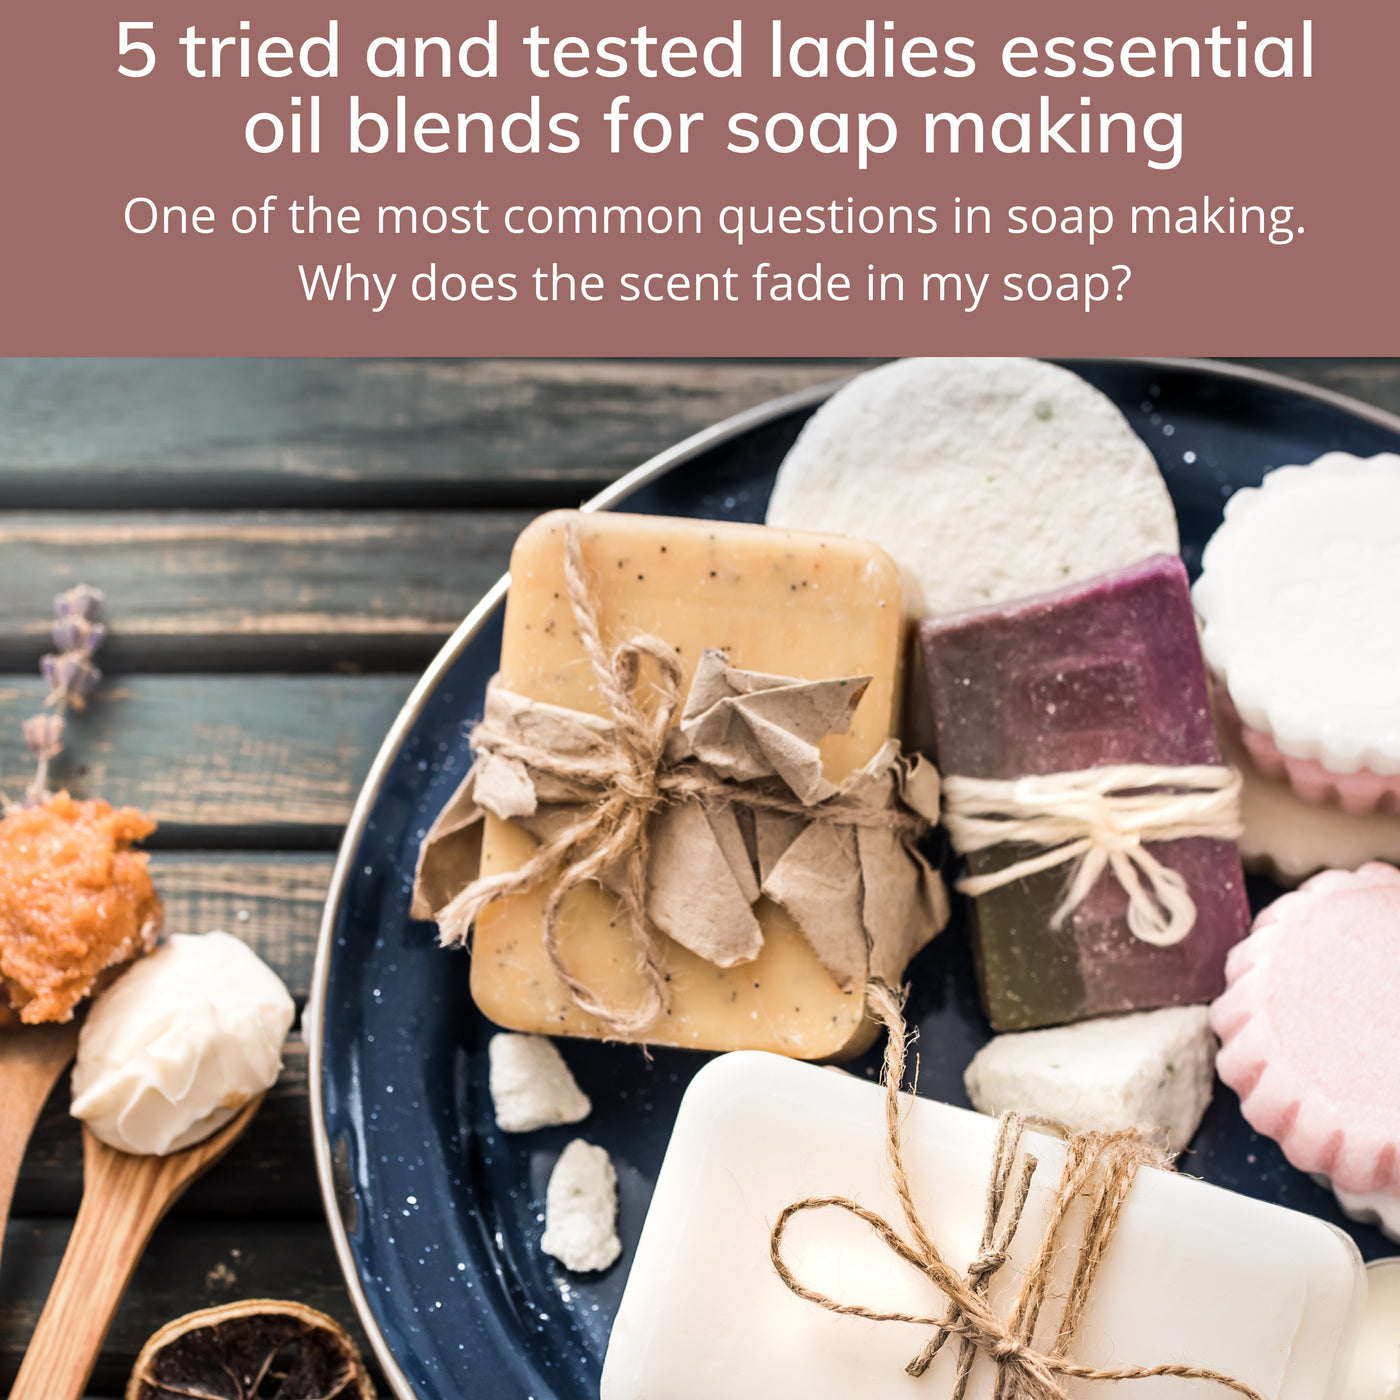 5 tried and tested ladies essential oil blends for soap making